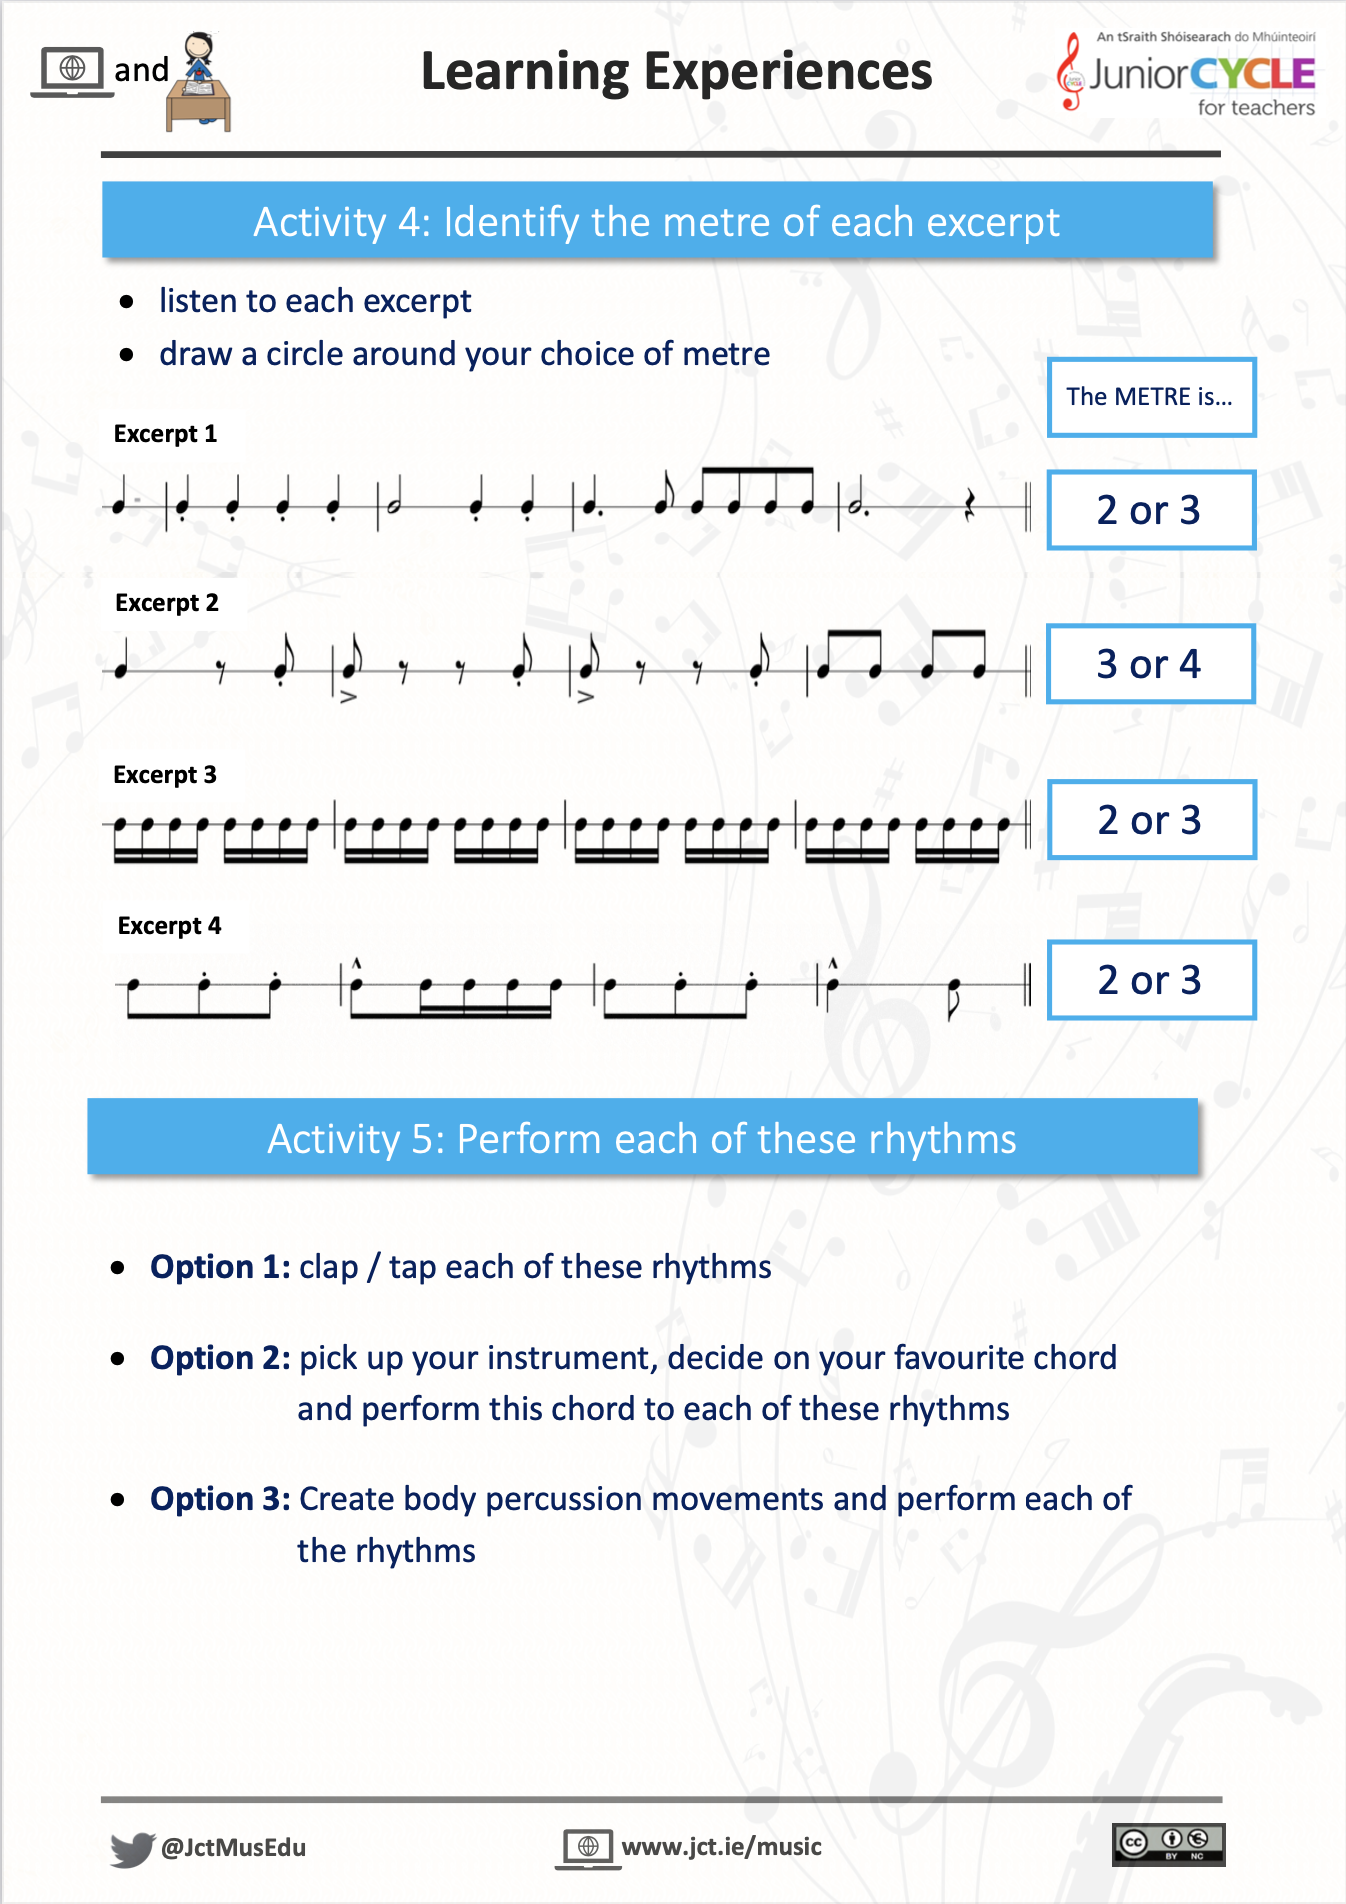 Online Learning Creating Music - Activity 4 & 5 PDF